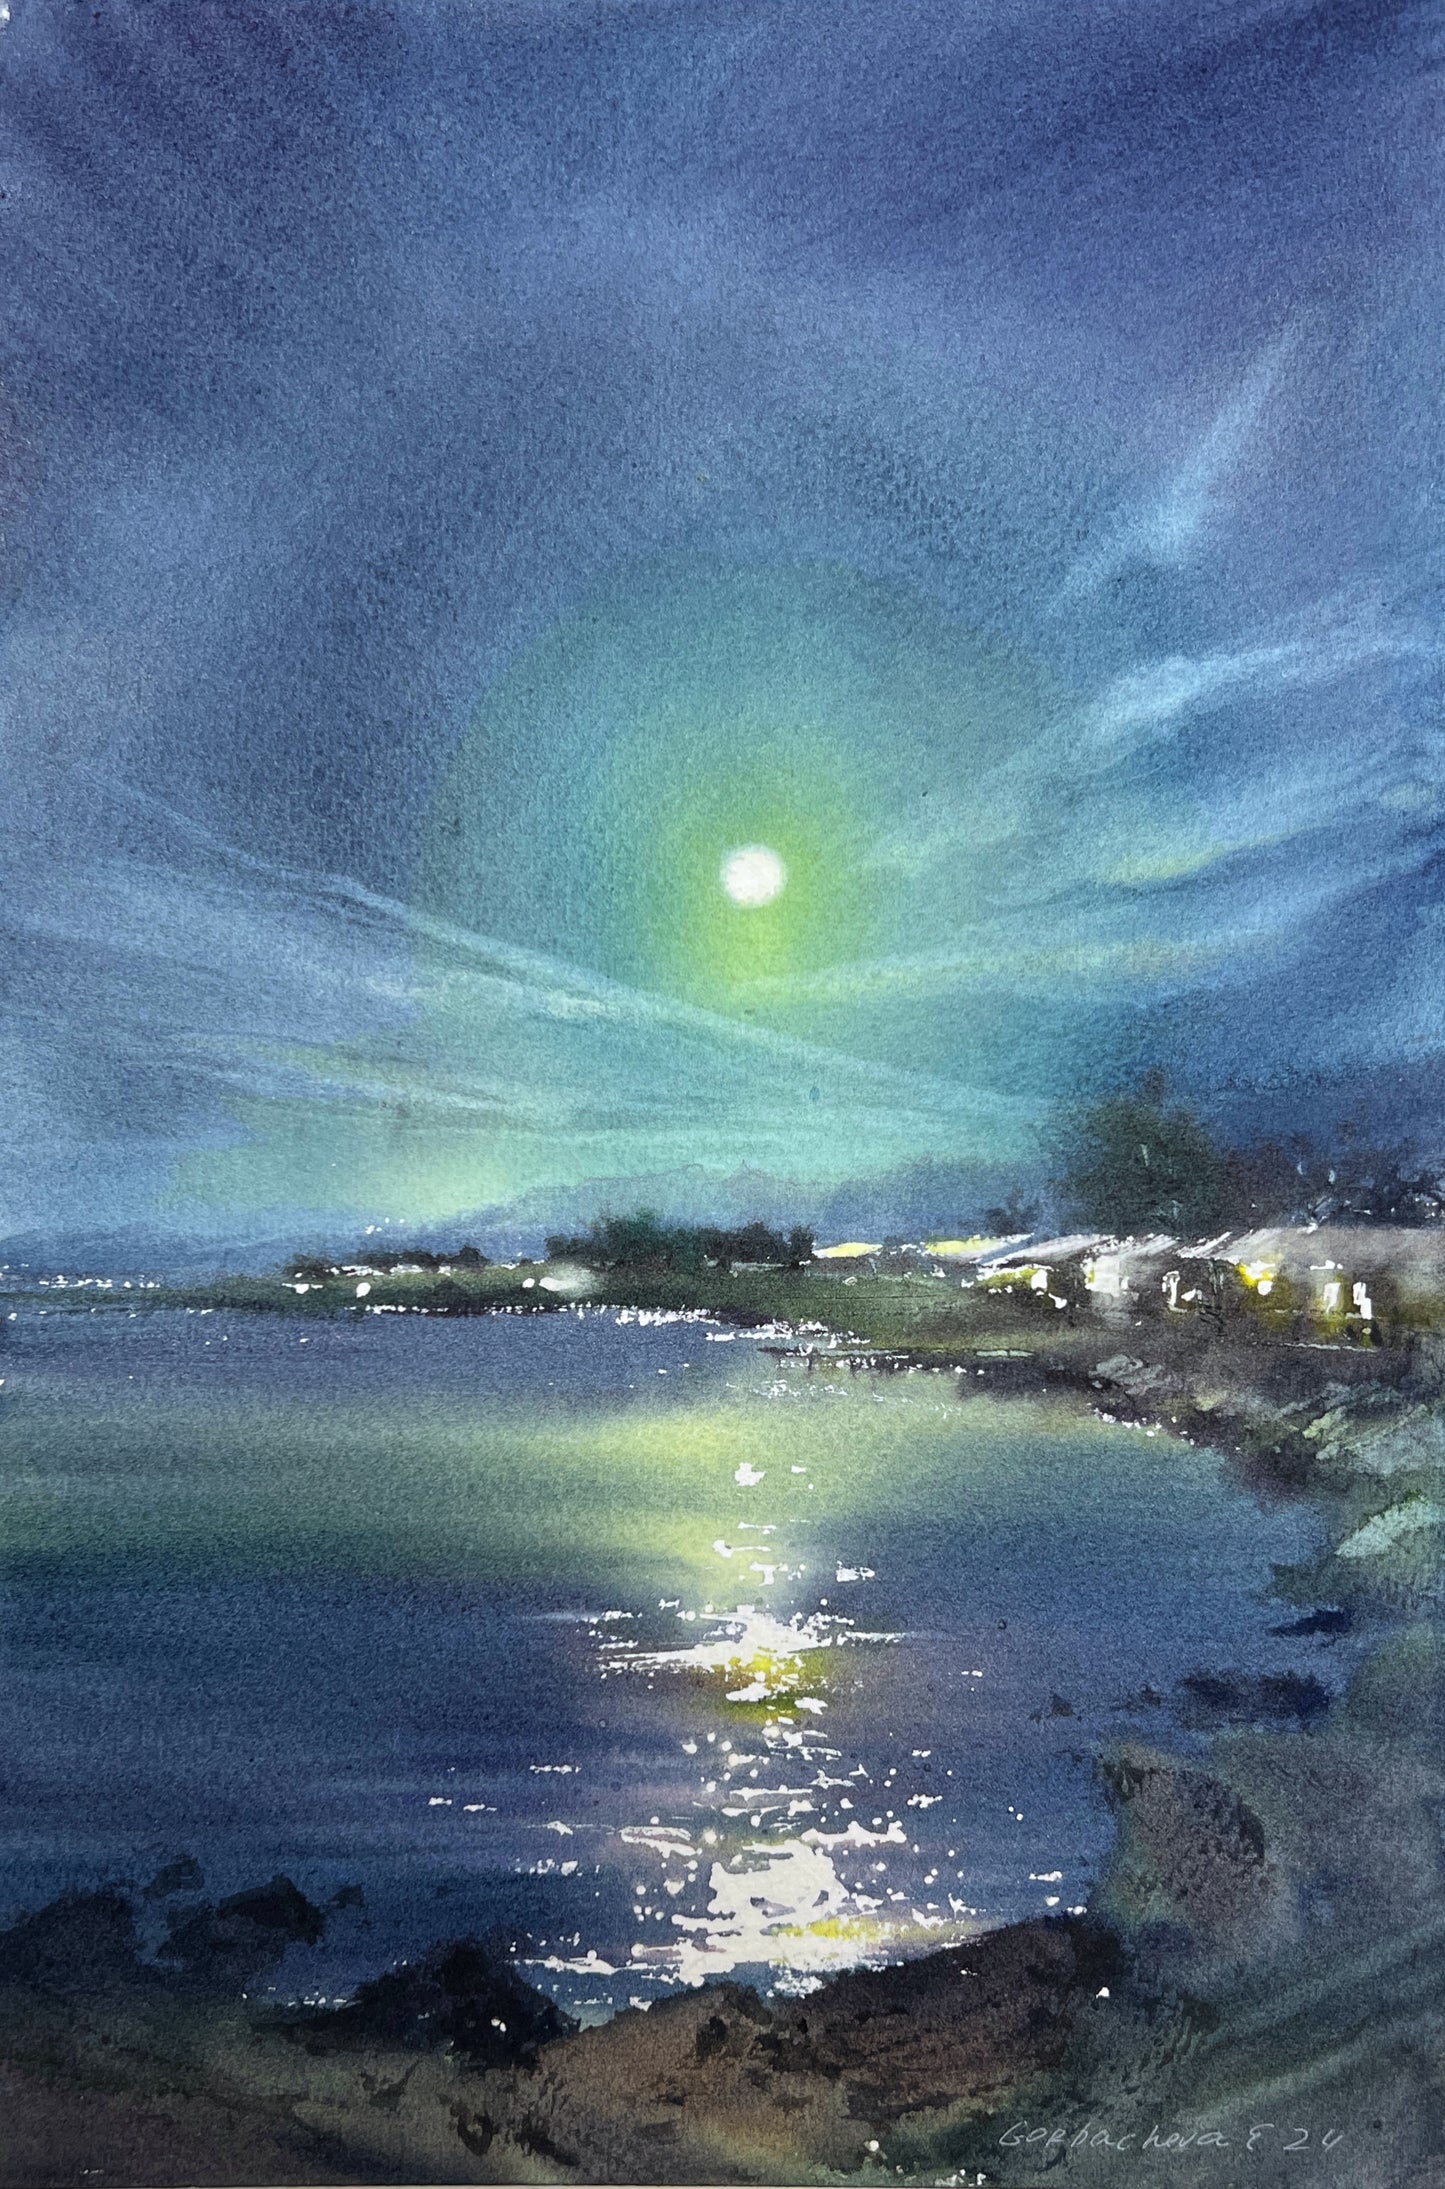 Seascape Painting Original, Small Watercolor Artwork - In the moonlight #4